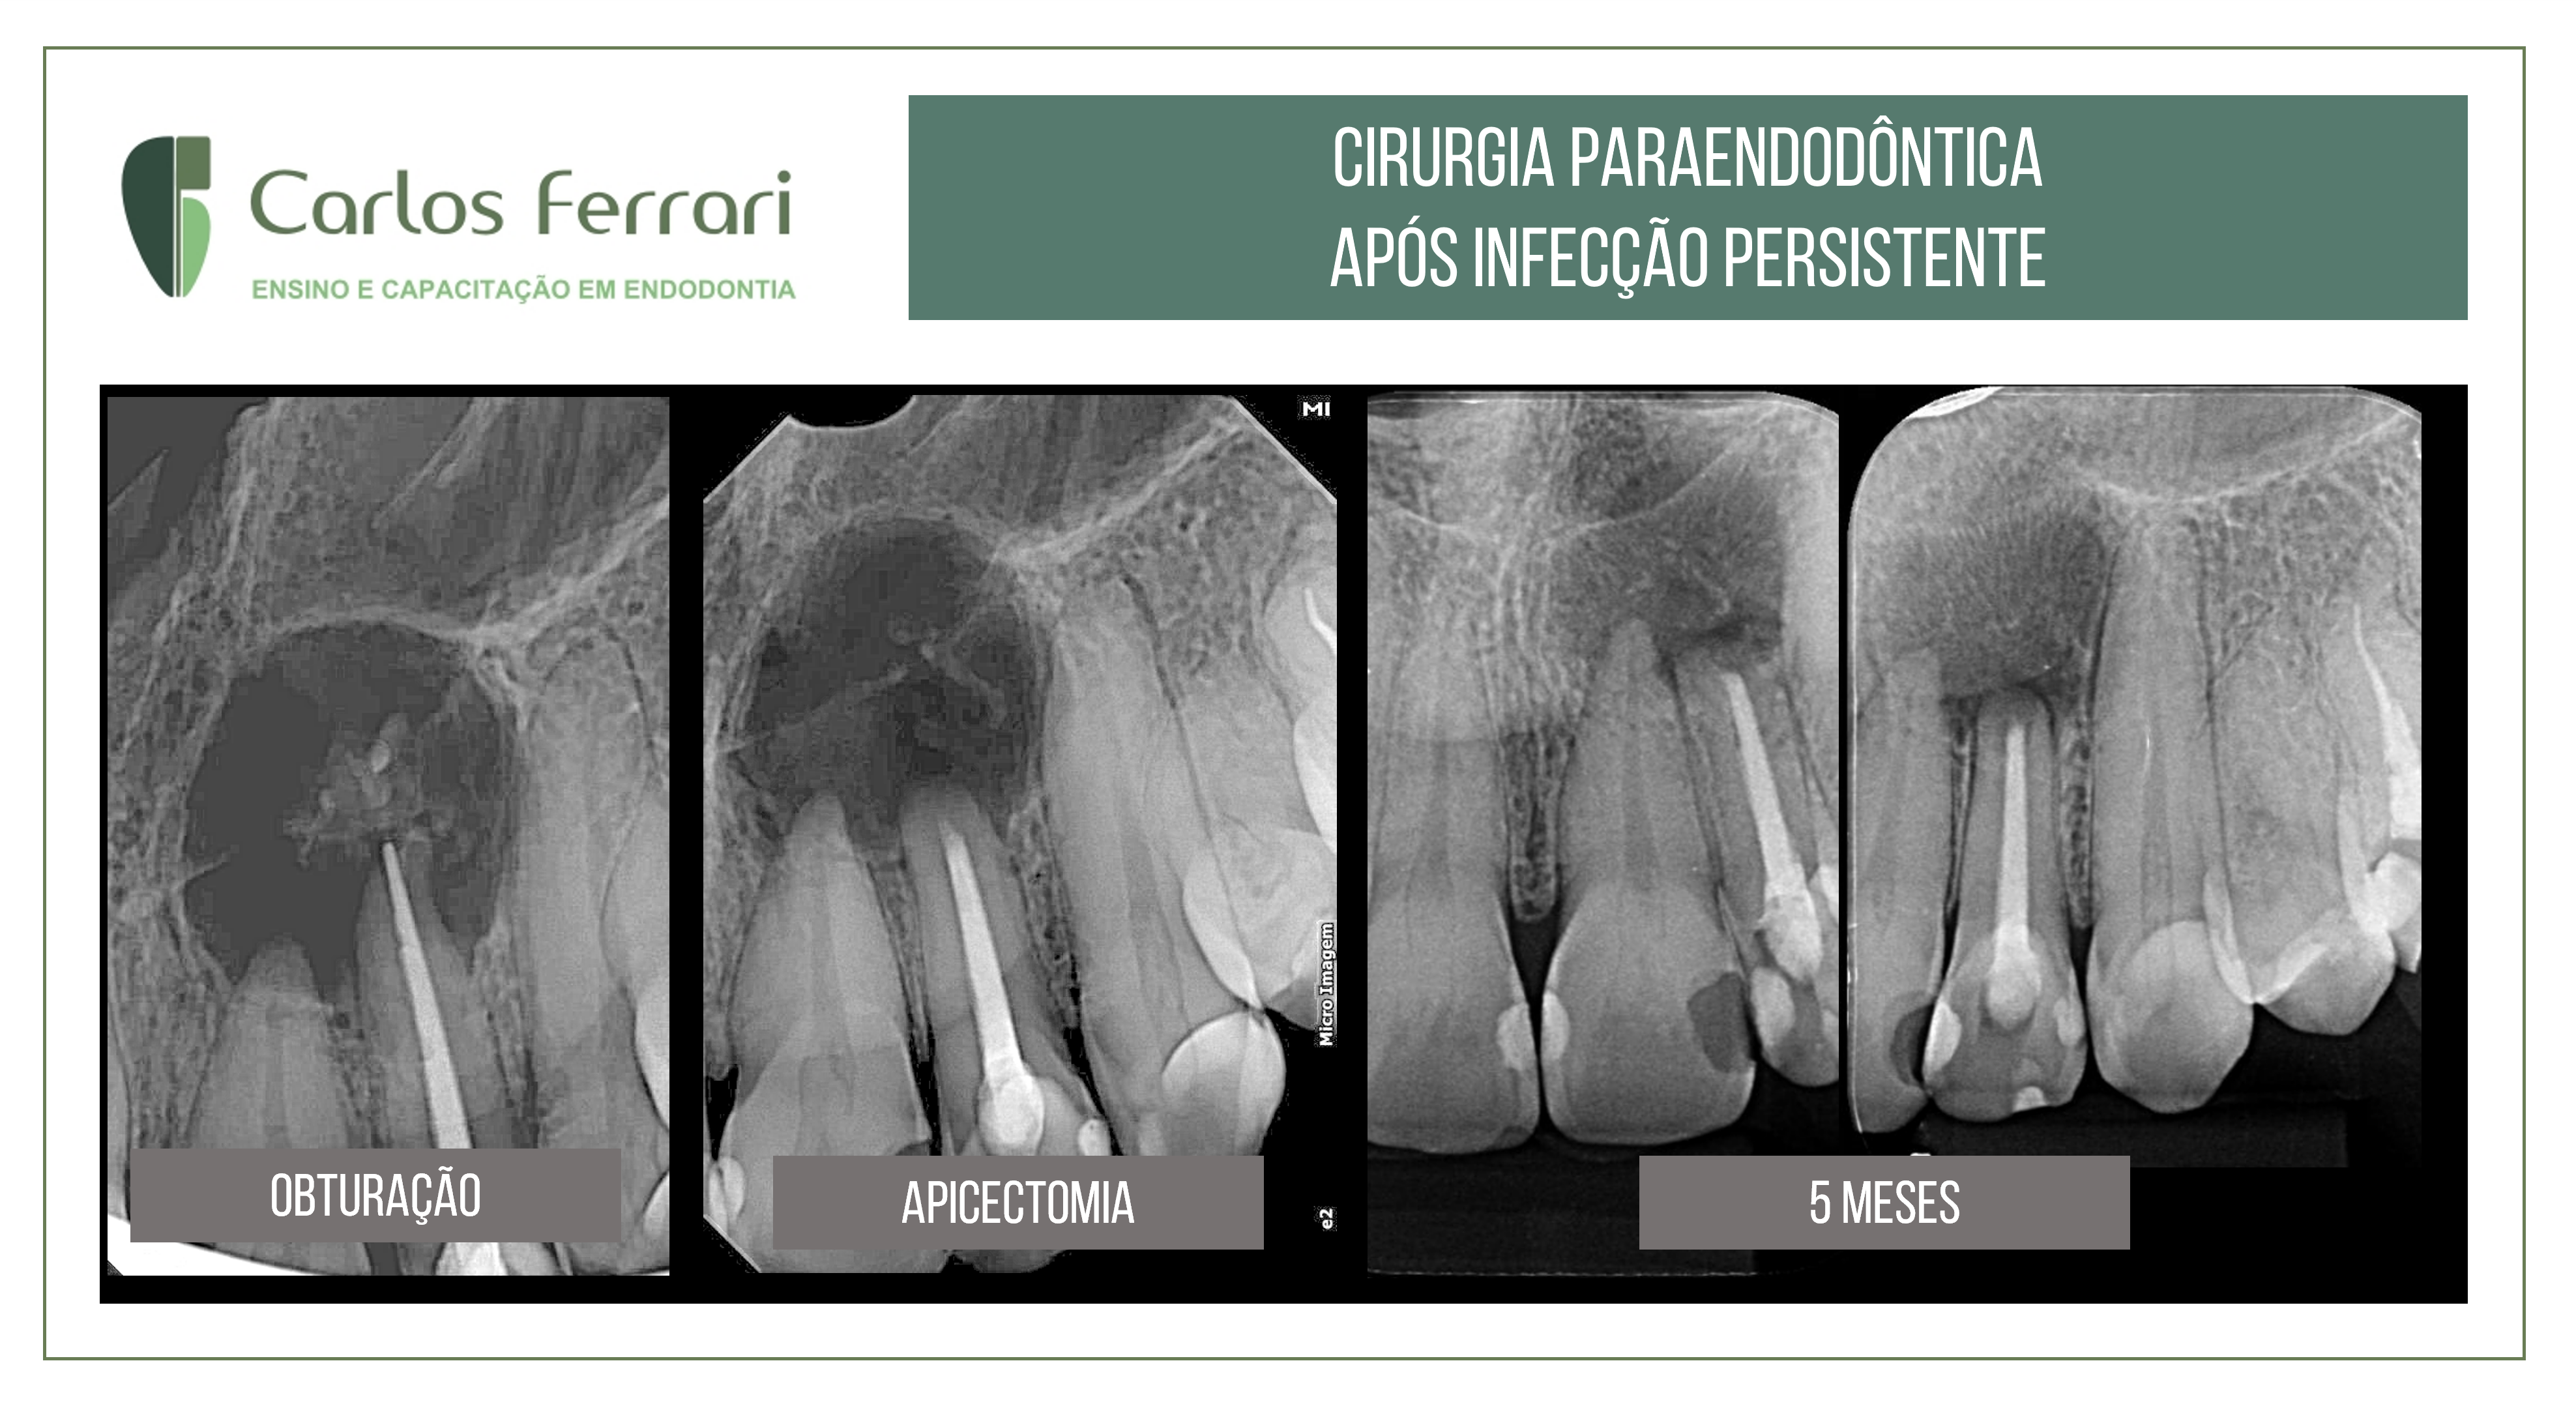 You are currently viewing Endodontic surgery after persistent infection in a tooth with periapical lesion.